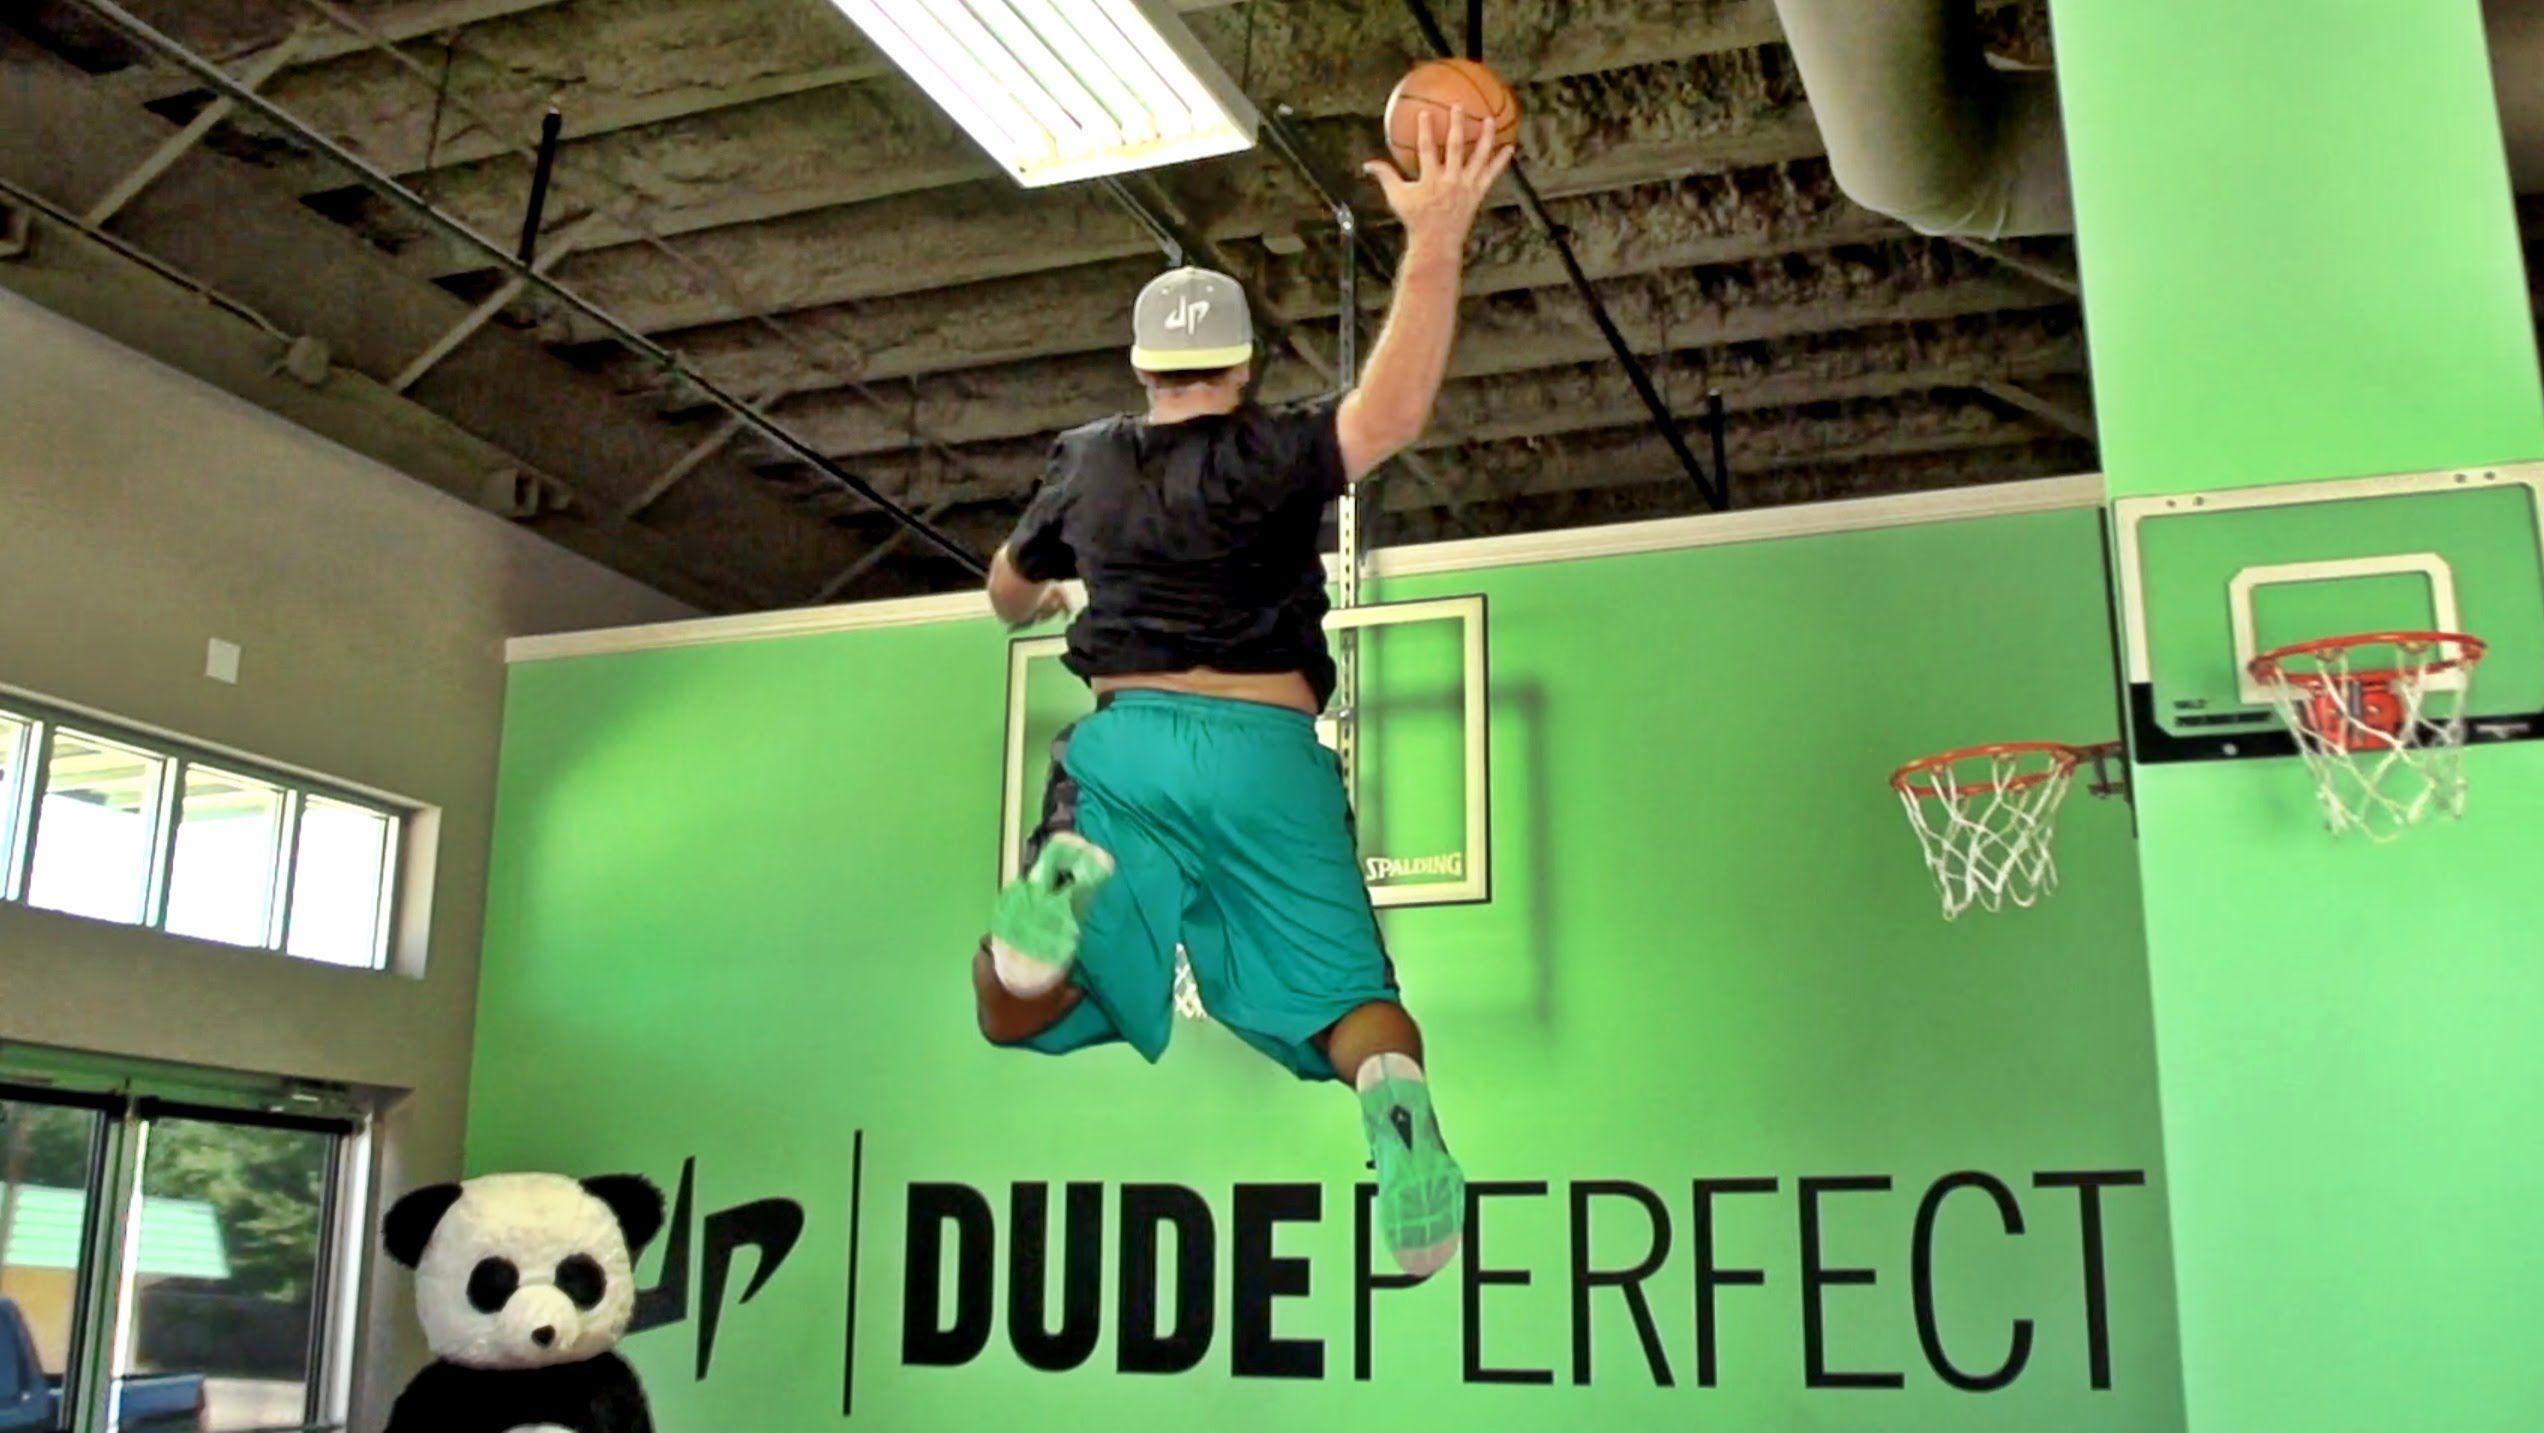 P Page Dudeperfect HD Image and Wallpaper